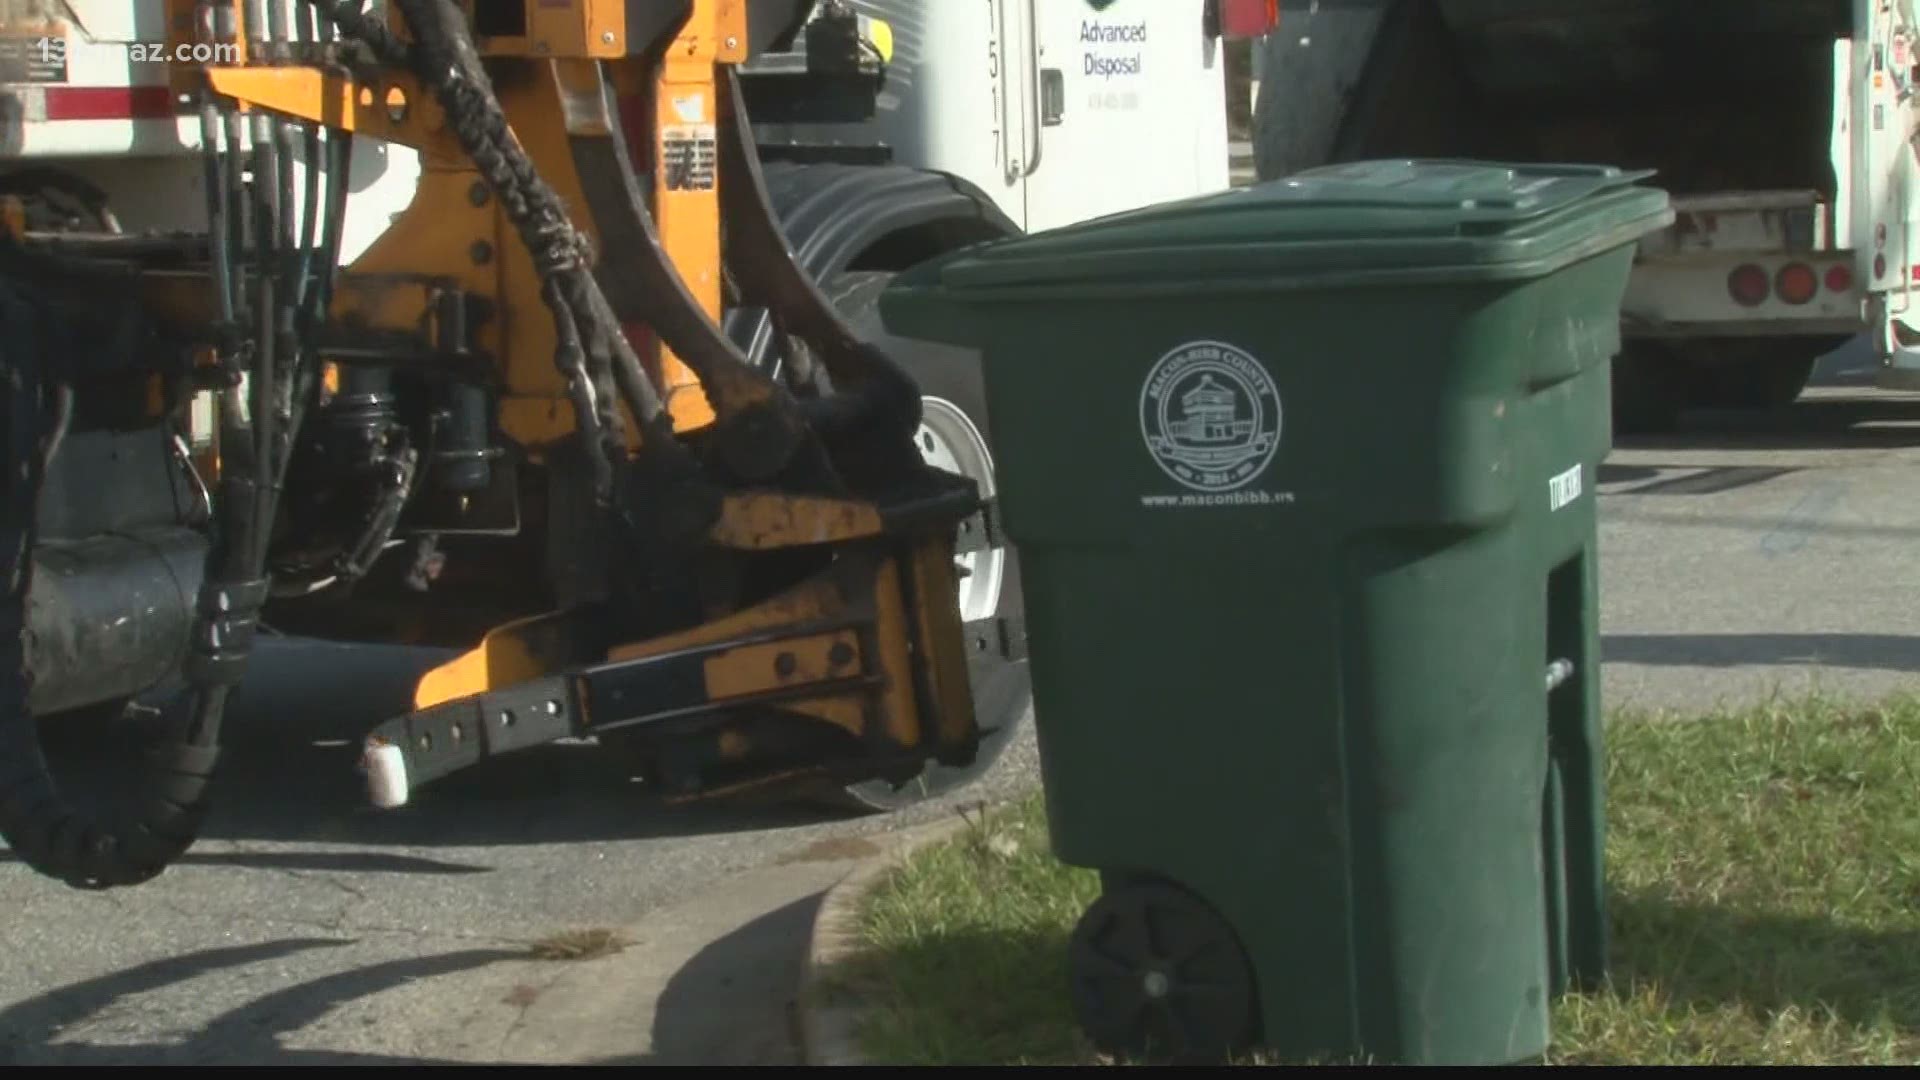 The county says they'll need to close the Walker Road Landfill in the next year and a half.